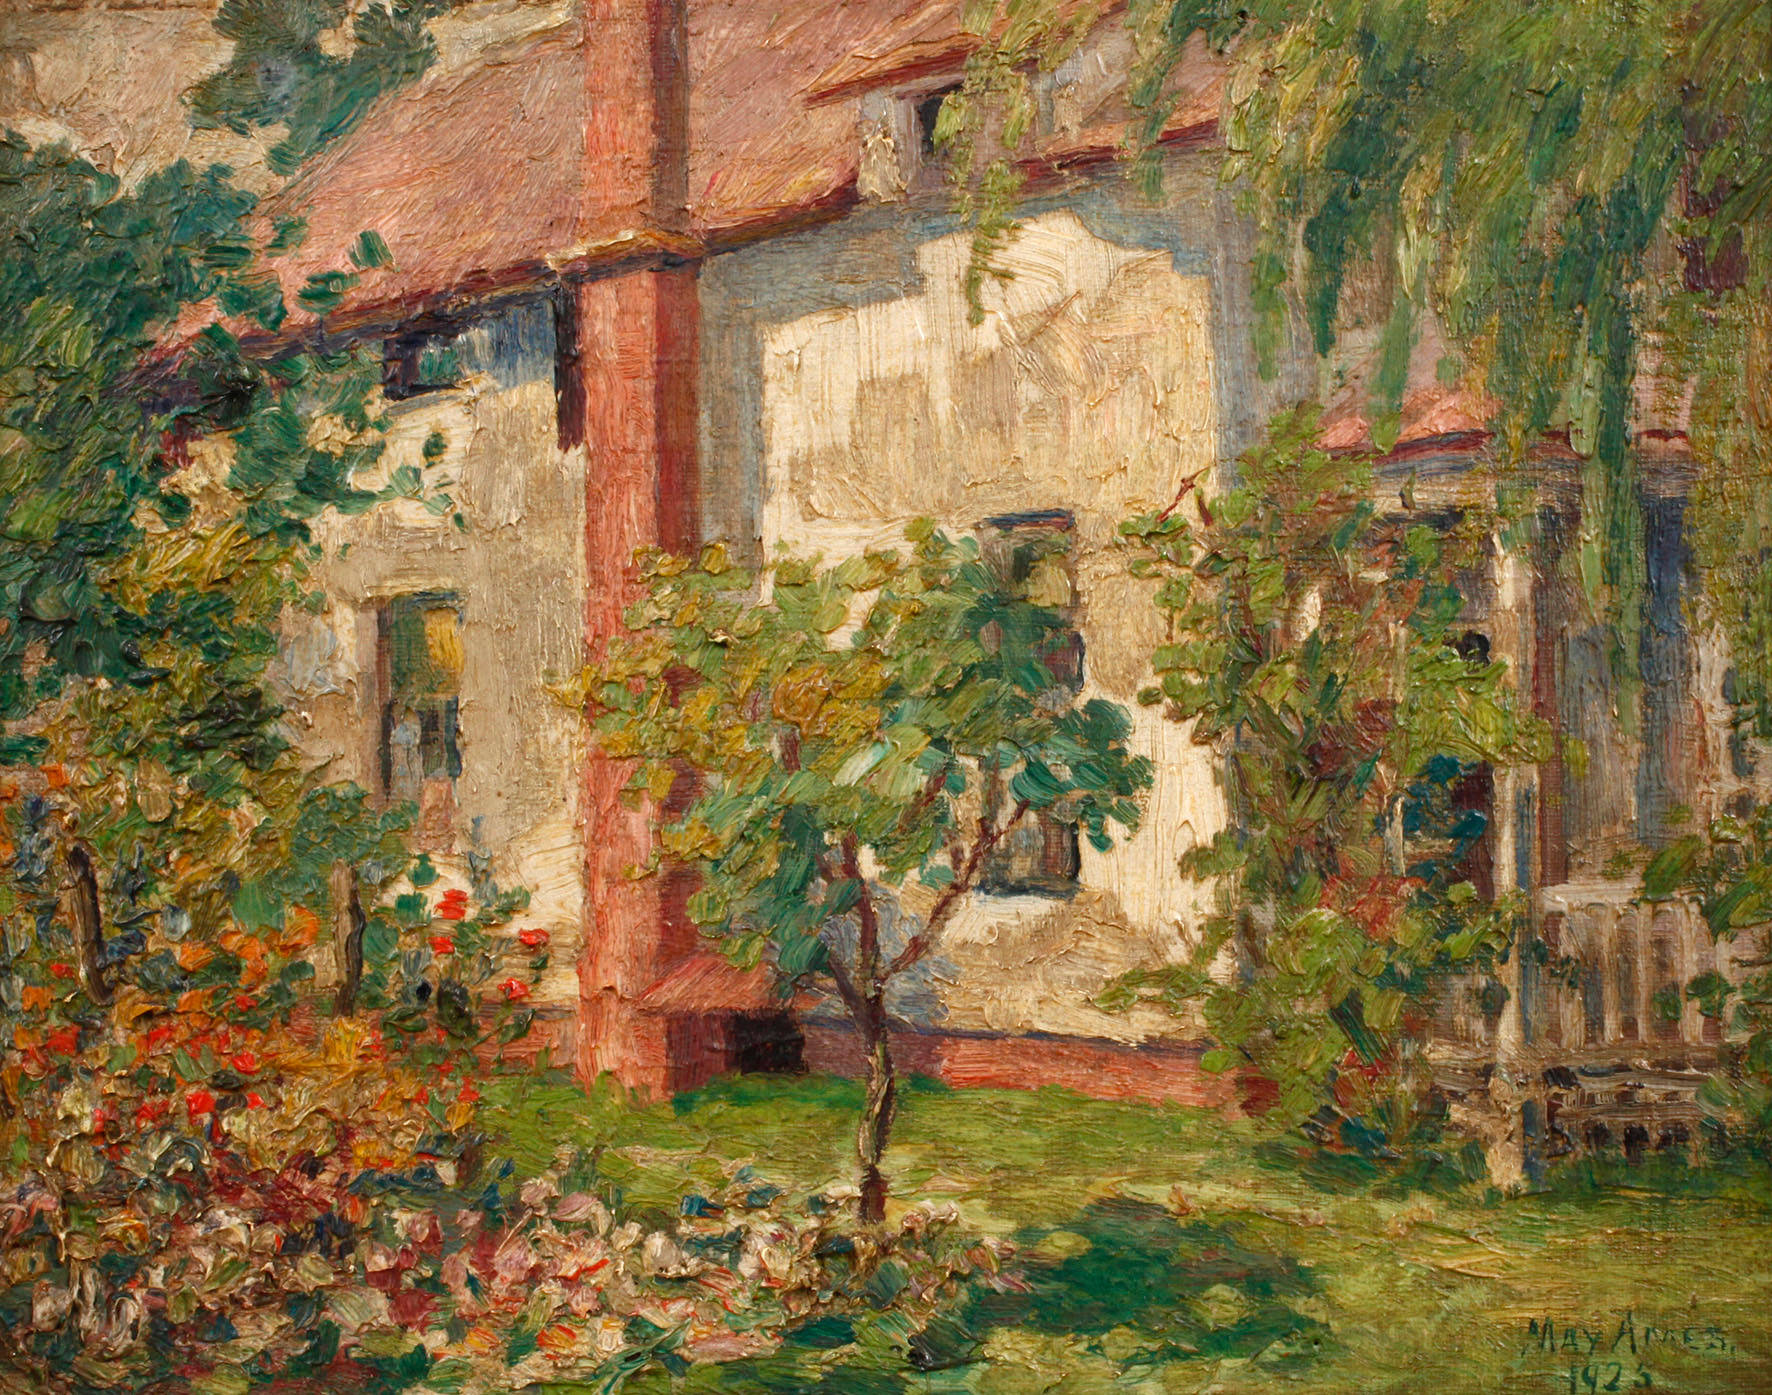 May Ames, Cottage in Cleveland